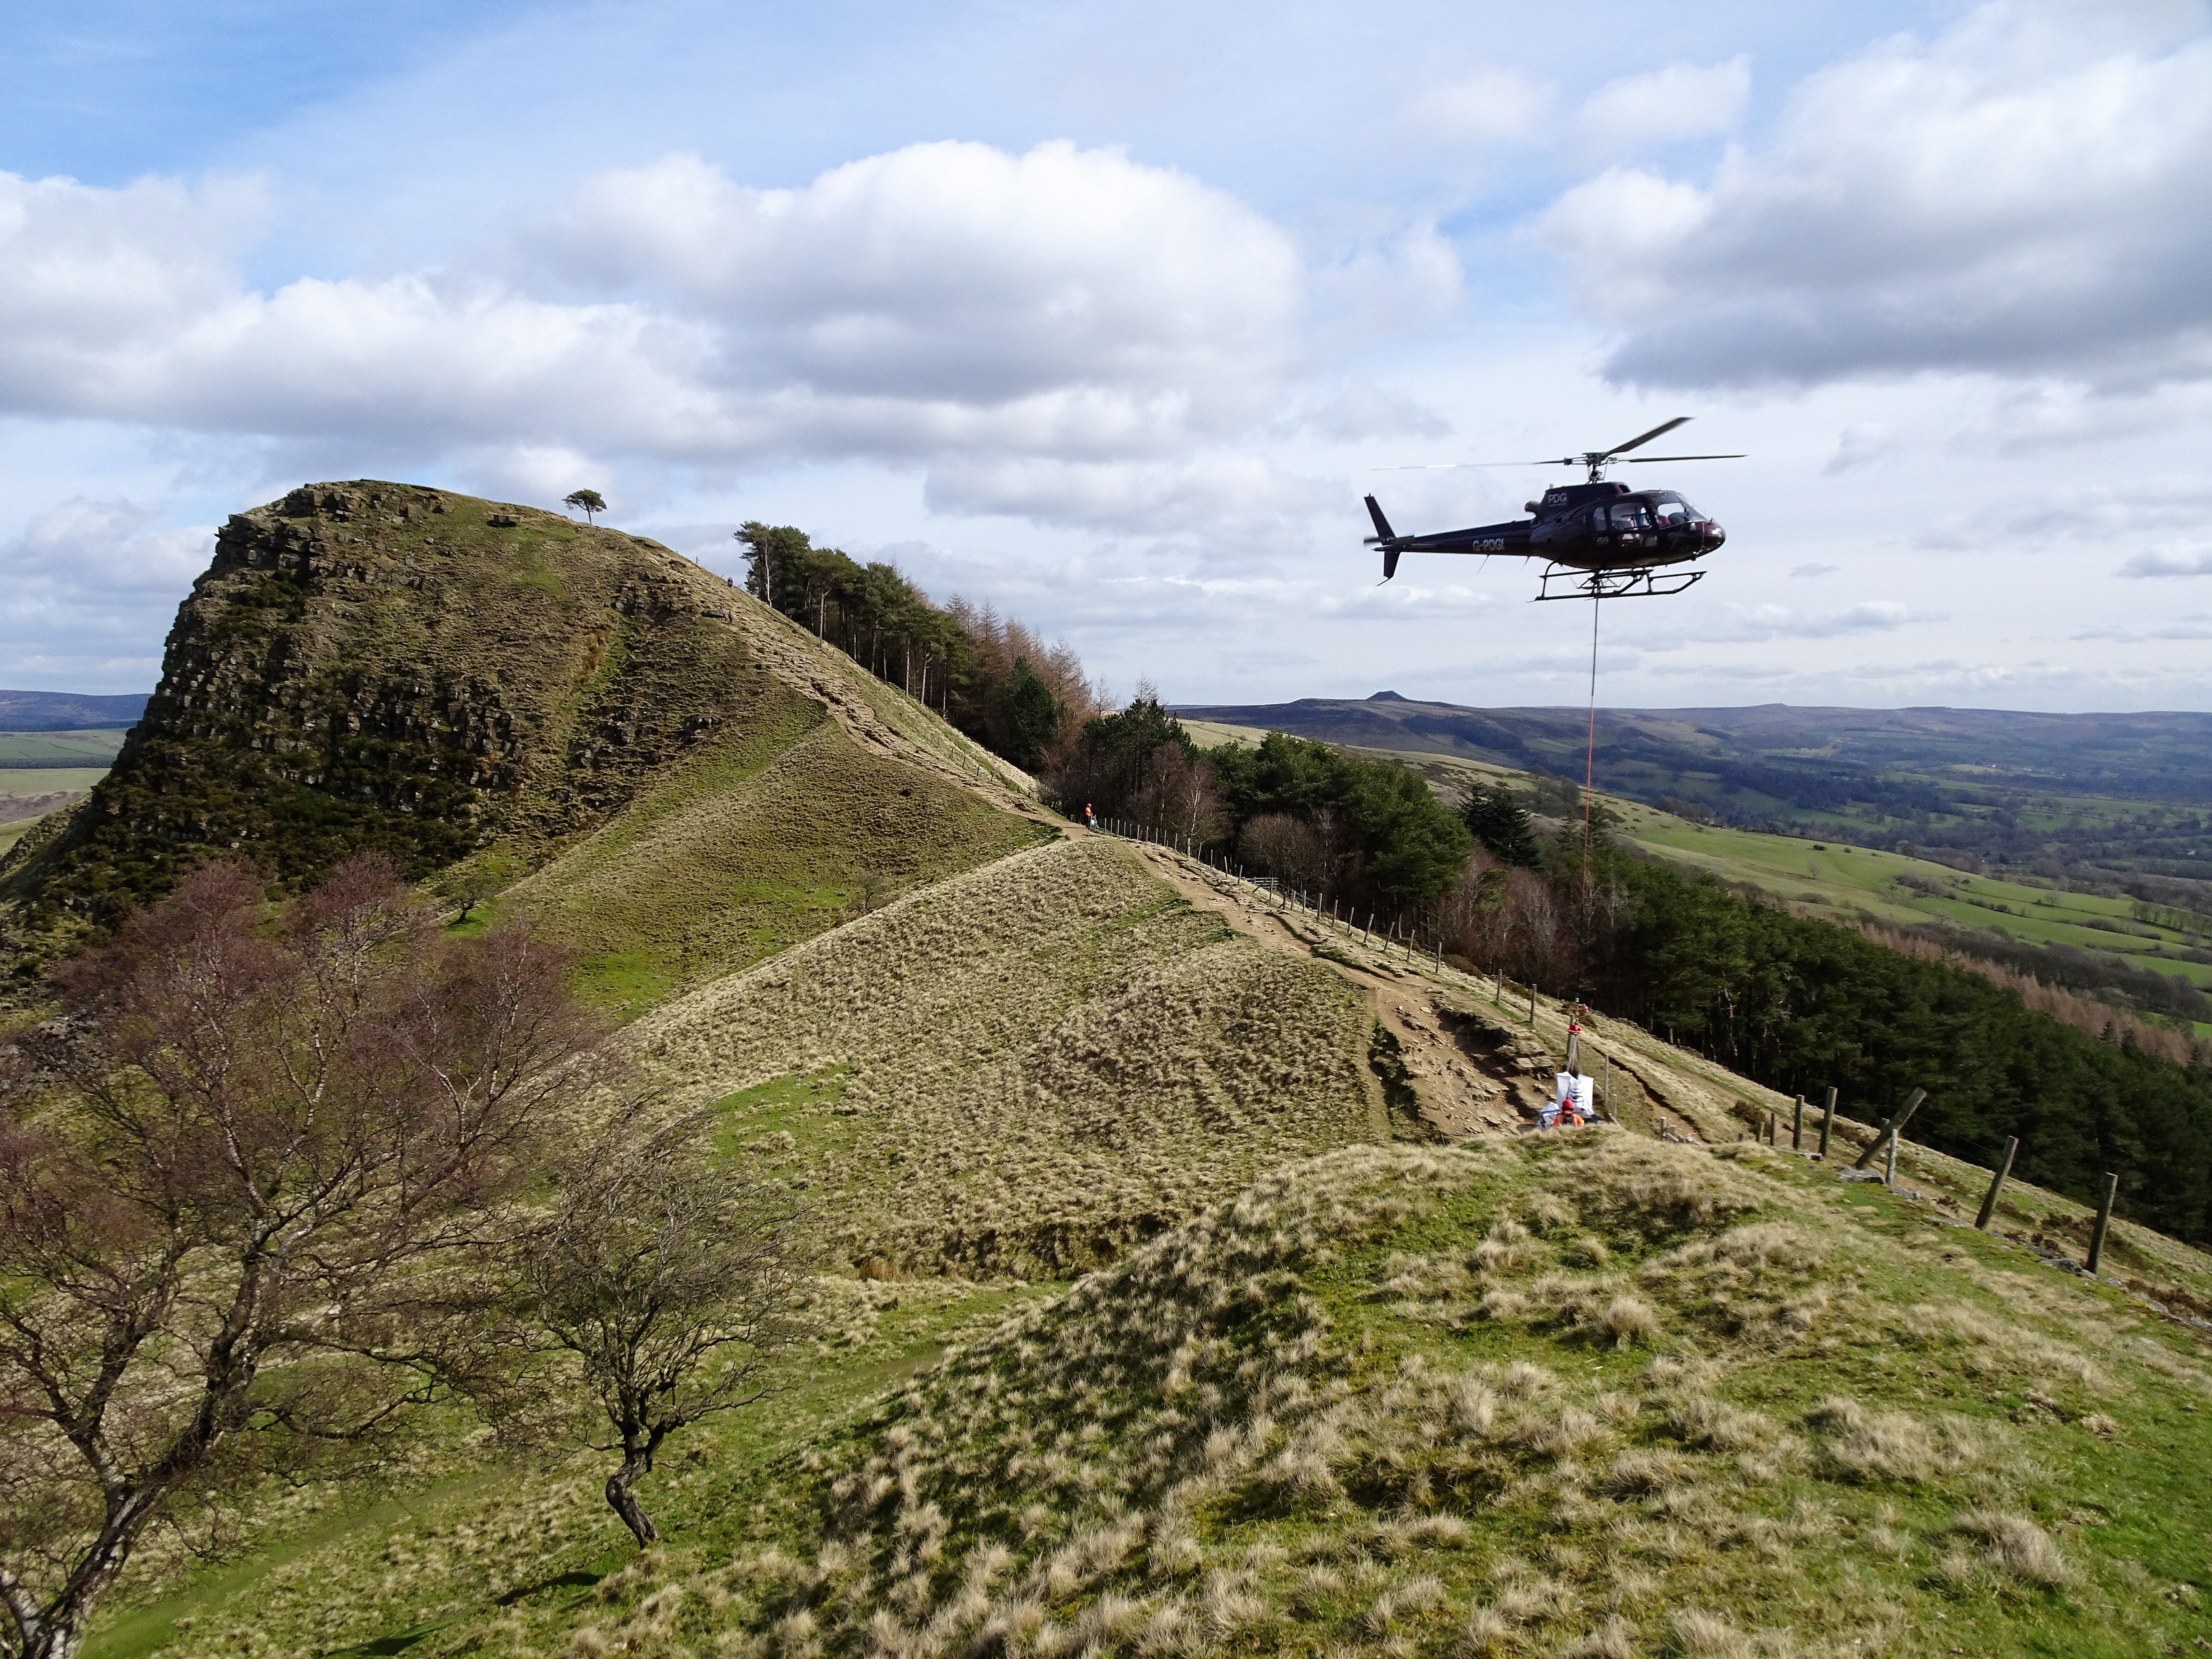 Airlifting materials onto Back Tor